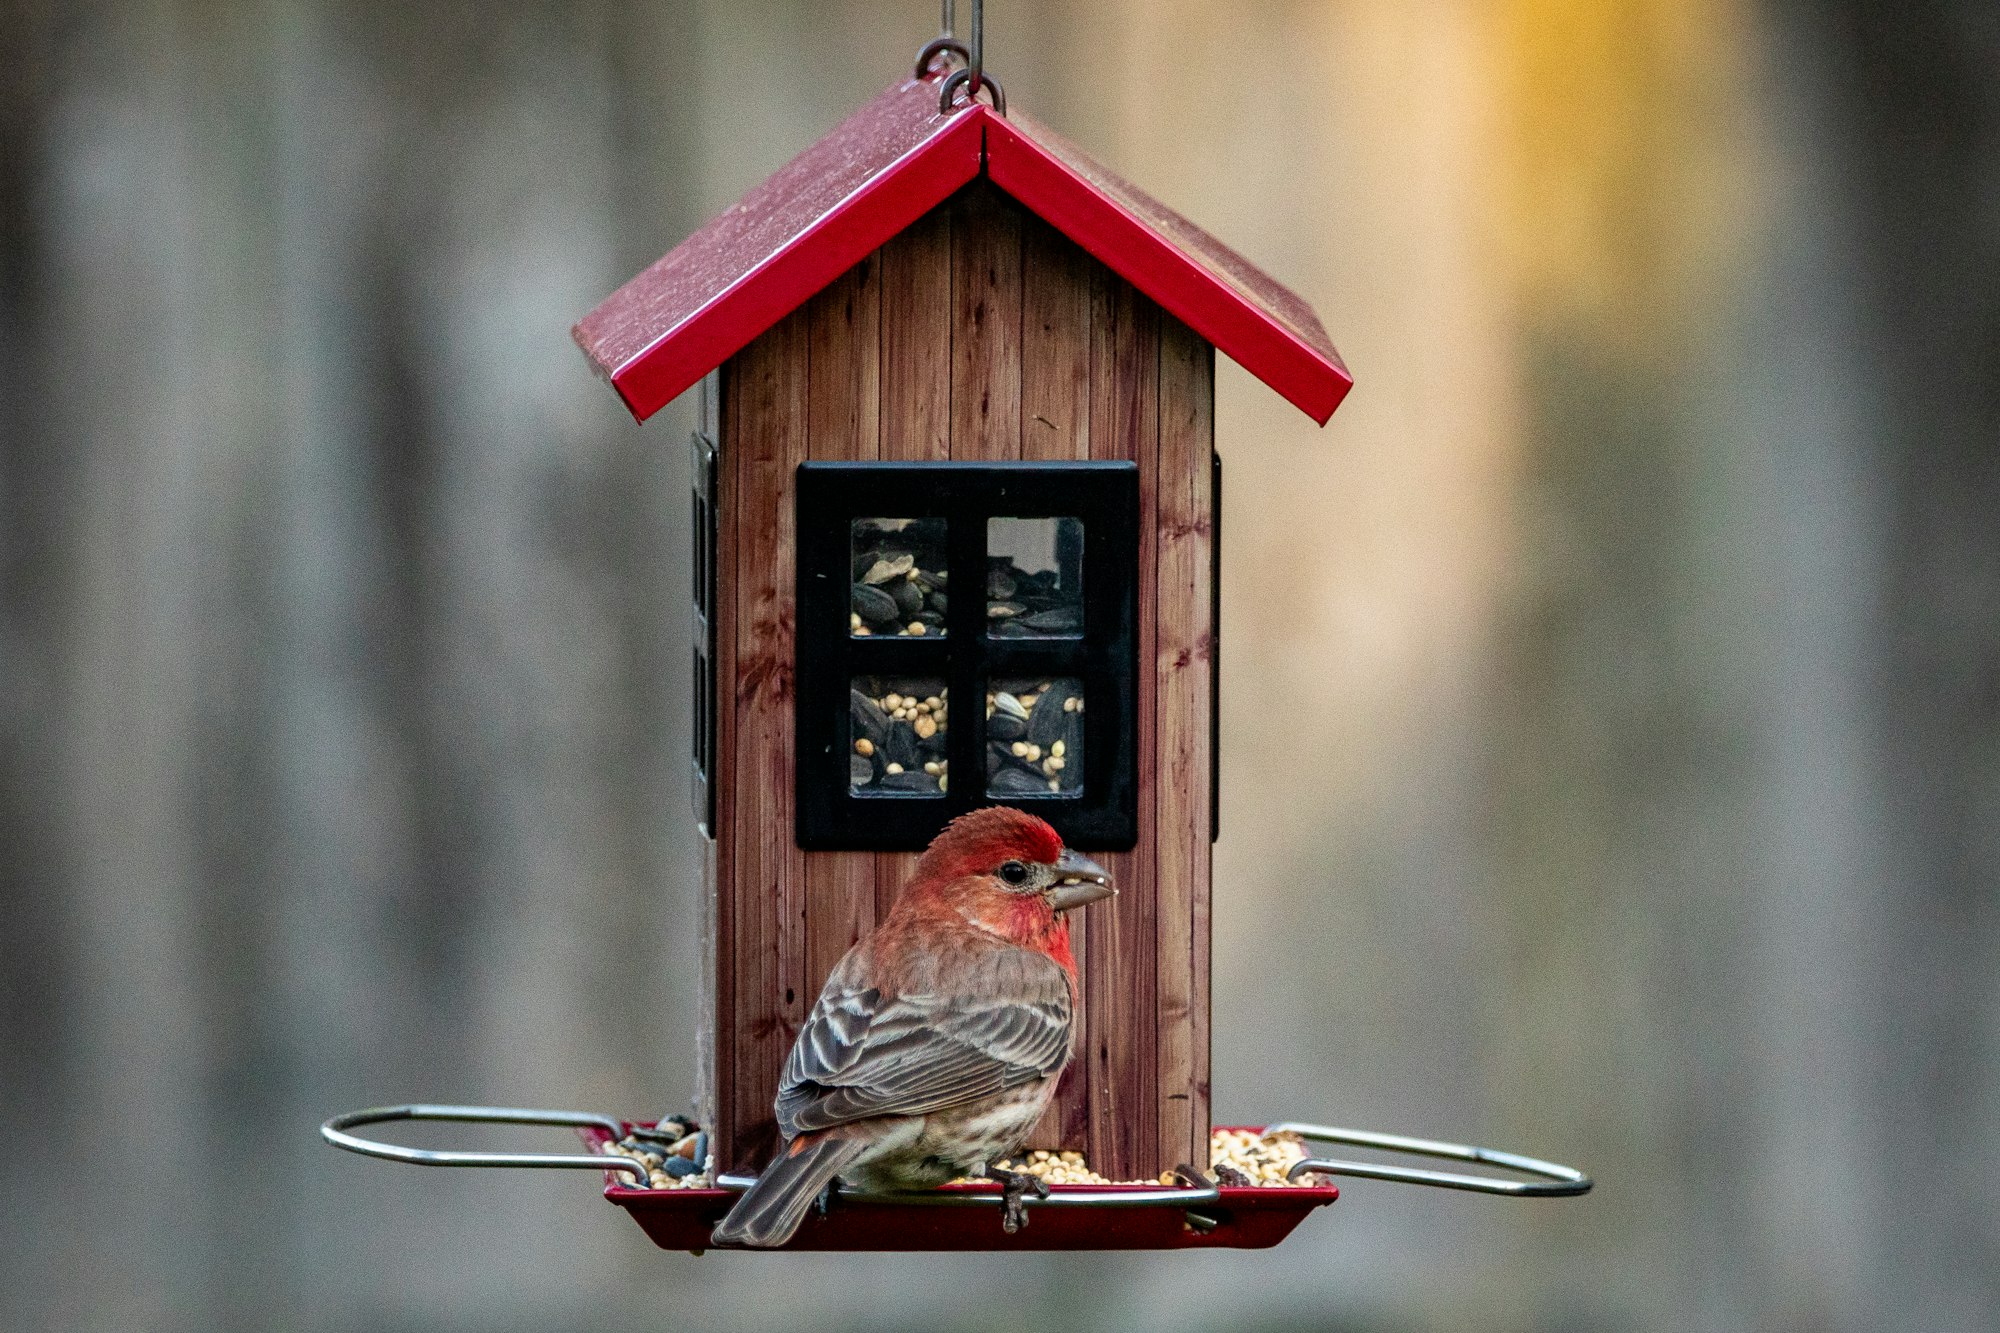 A male house finch gets a bite to eat from the feeder.